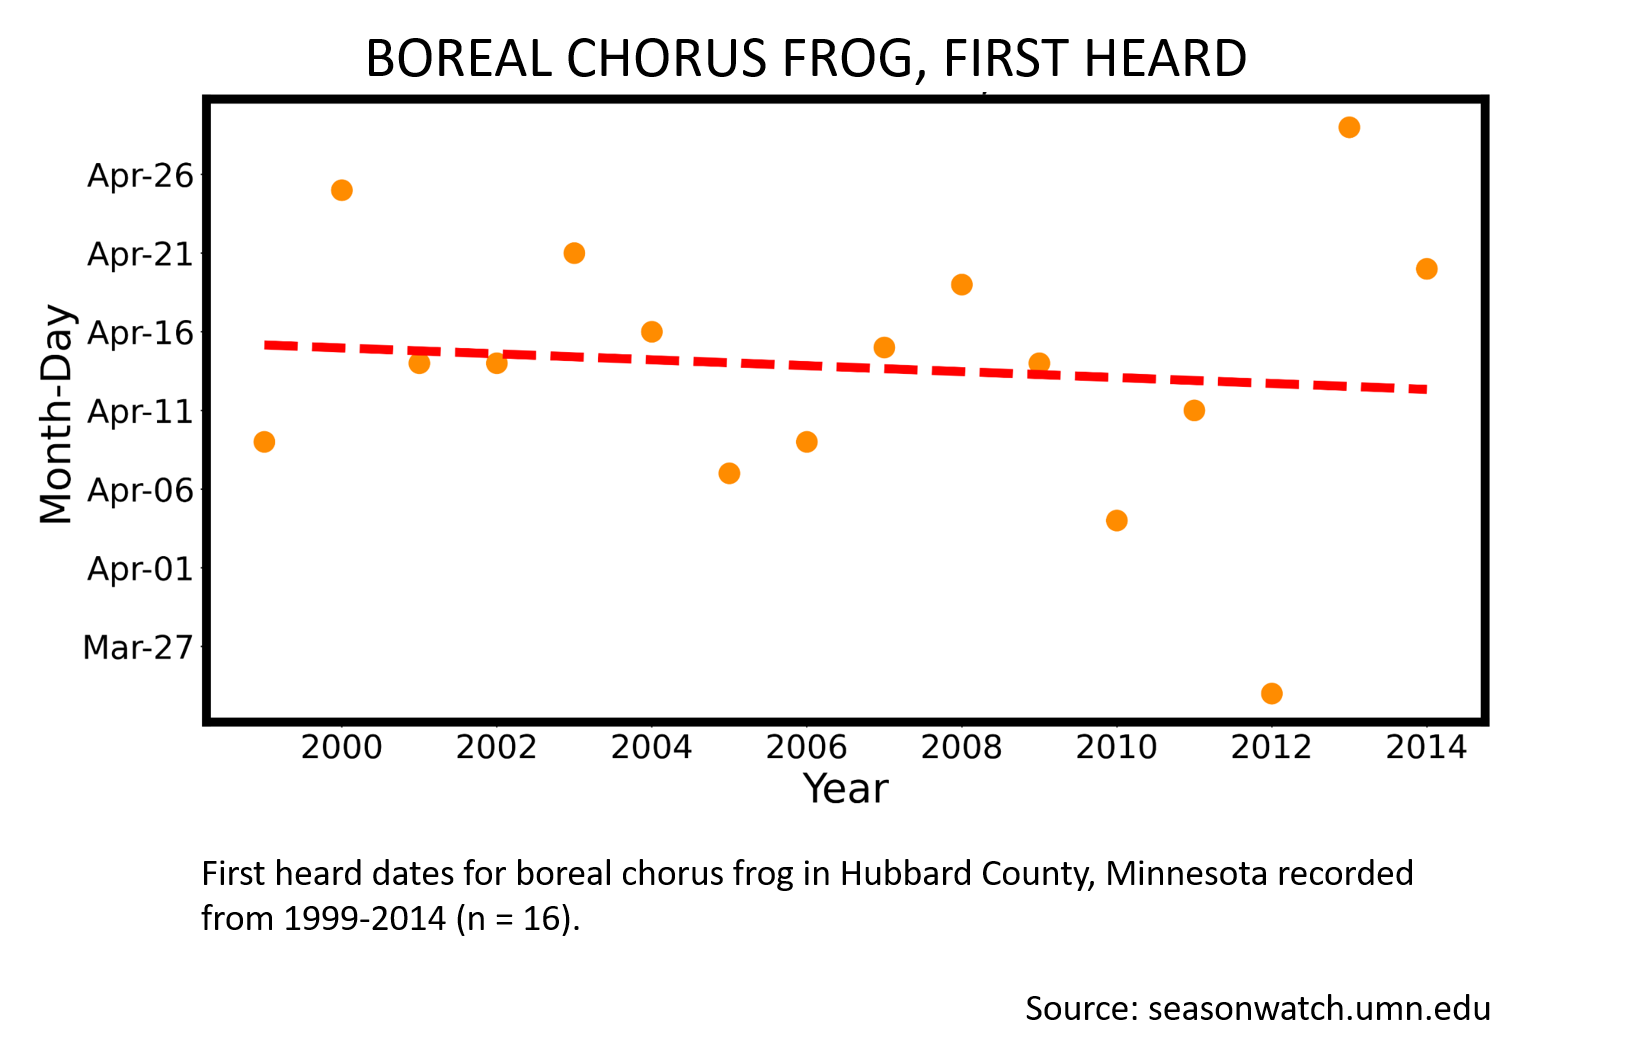 Scatterplot showing boreal chorus frog phenology in Hubbard County, Minnesota